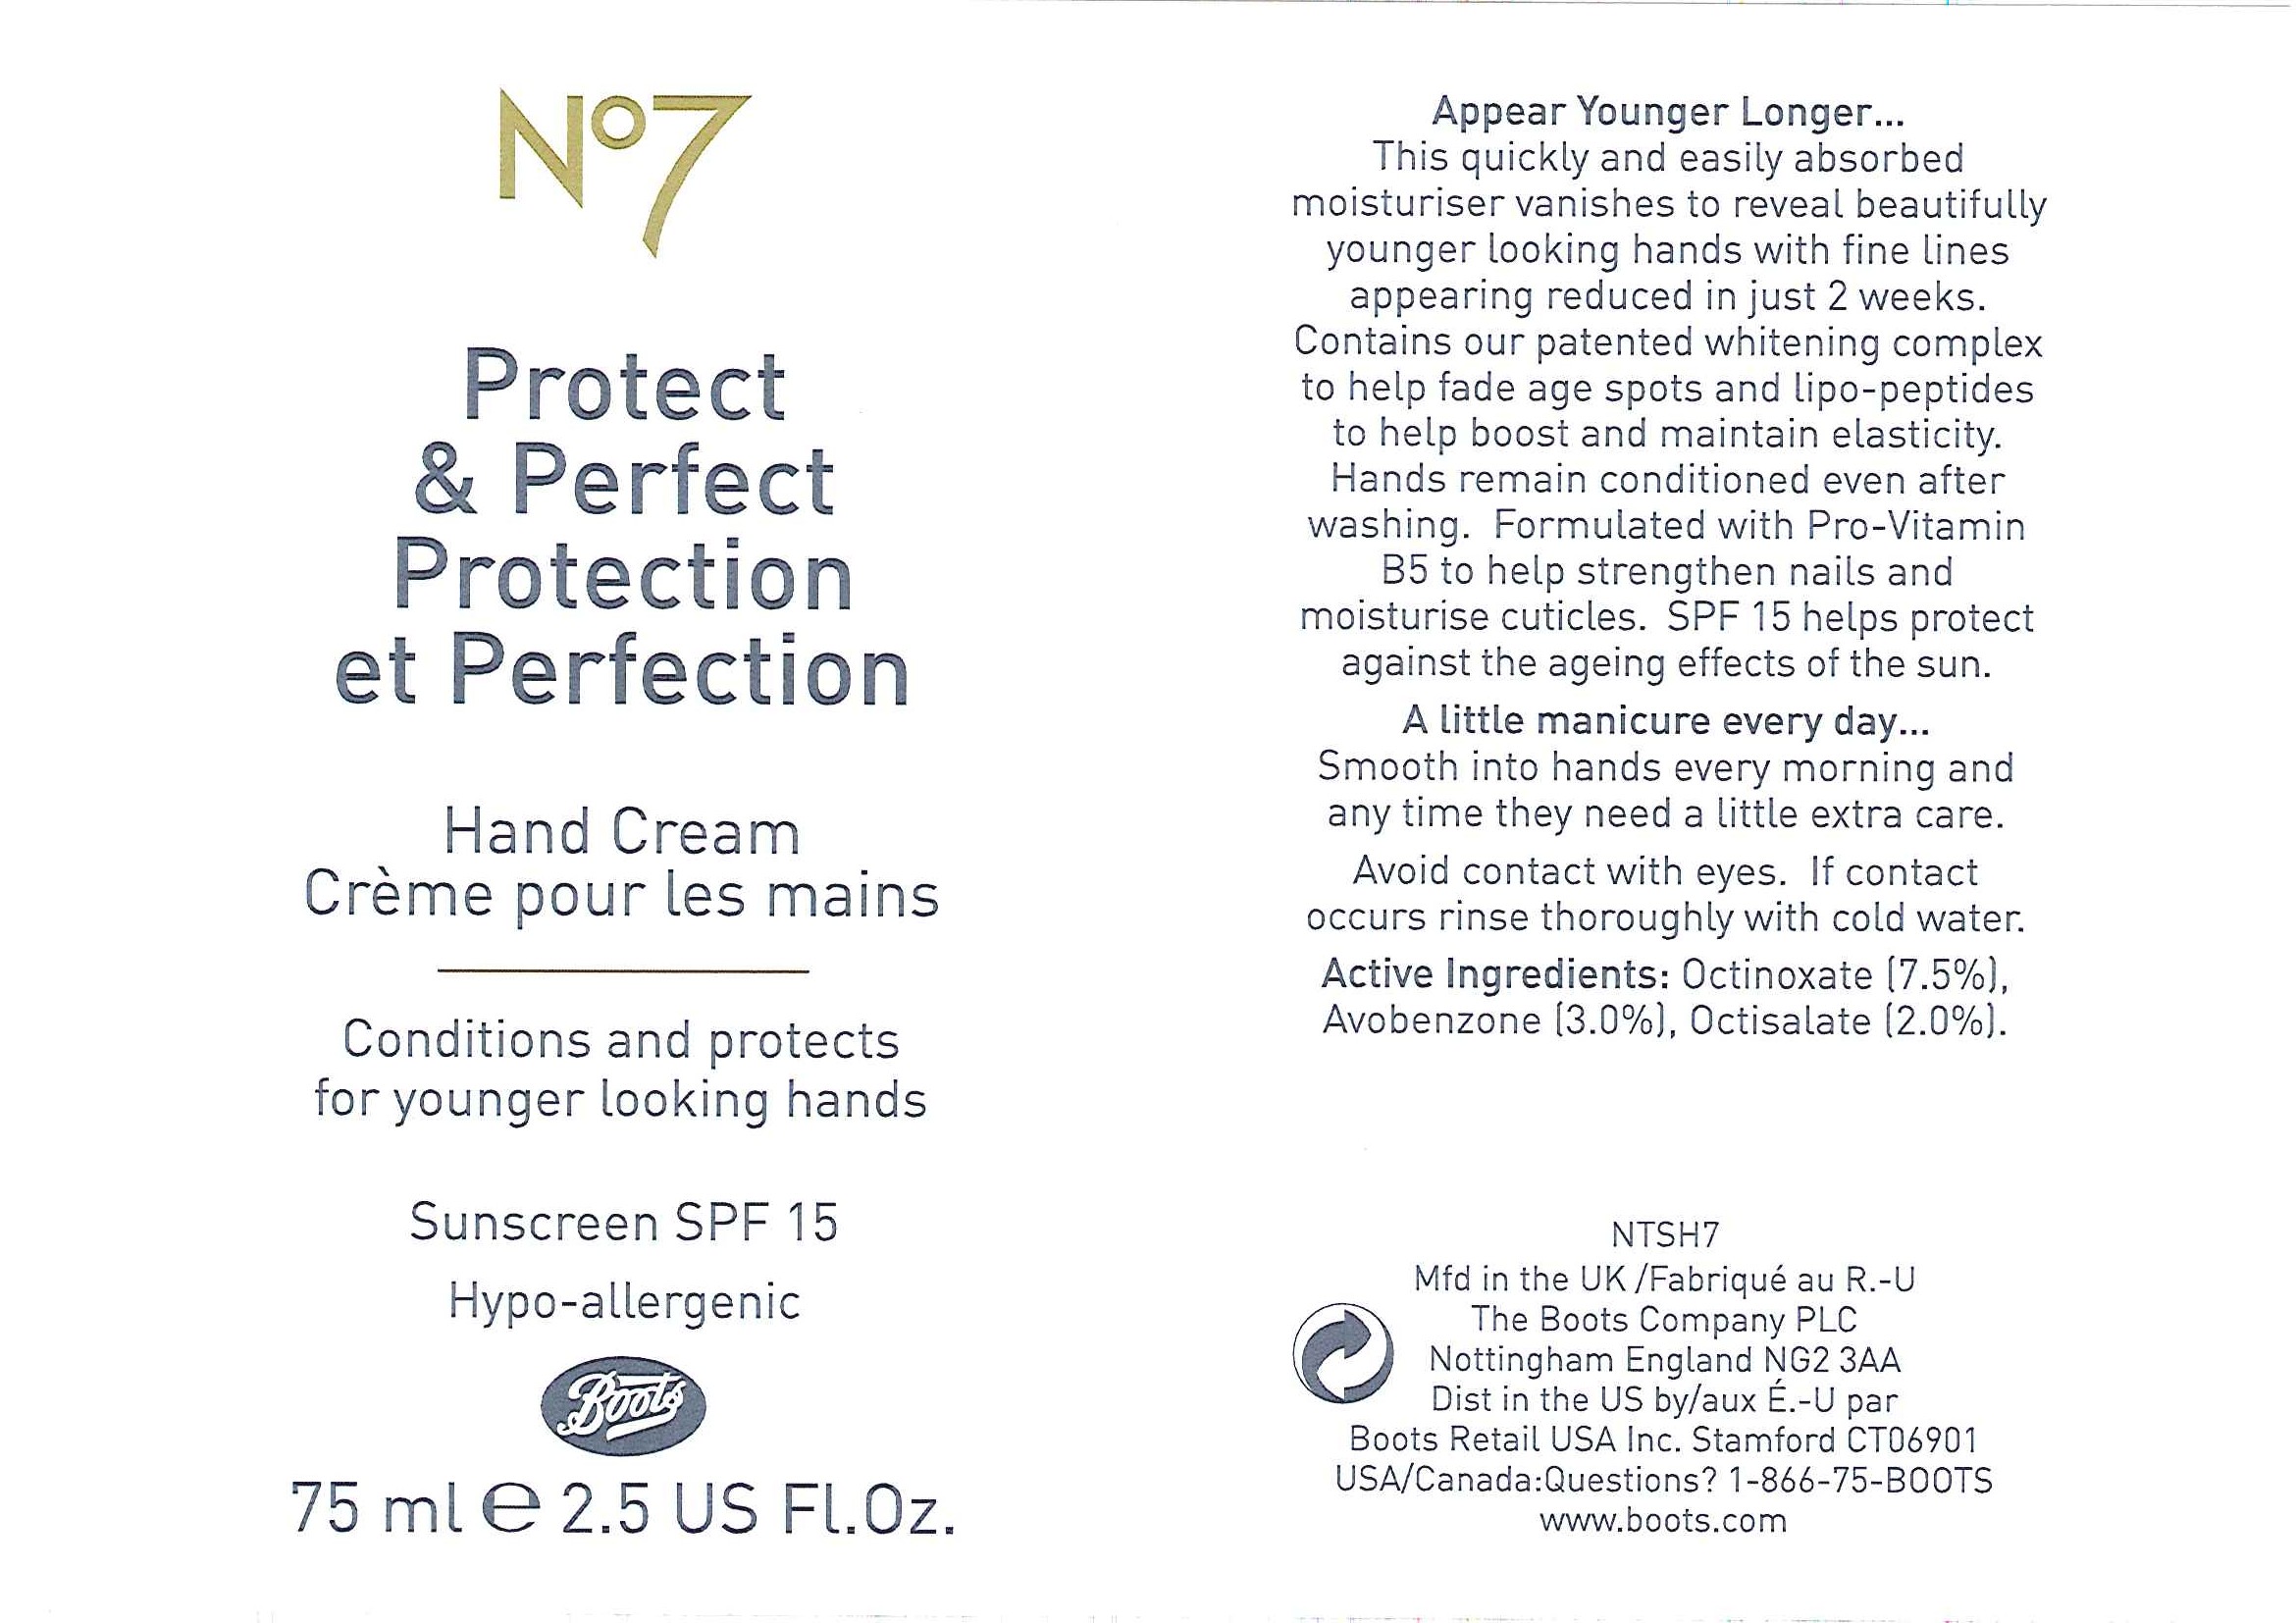 Is No7 Protect And Perfect Hand Cream Sunscreen Spf 15 | Octinoxate, Avobenzone And Octisalate Cream safe while breastfeeding